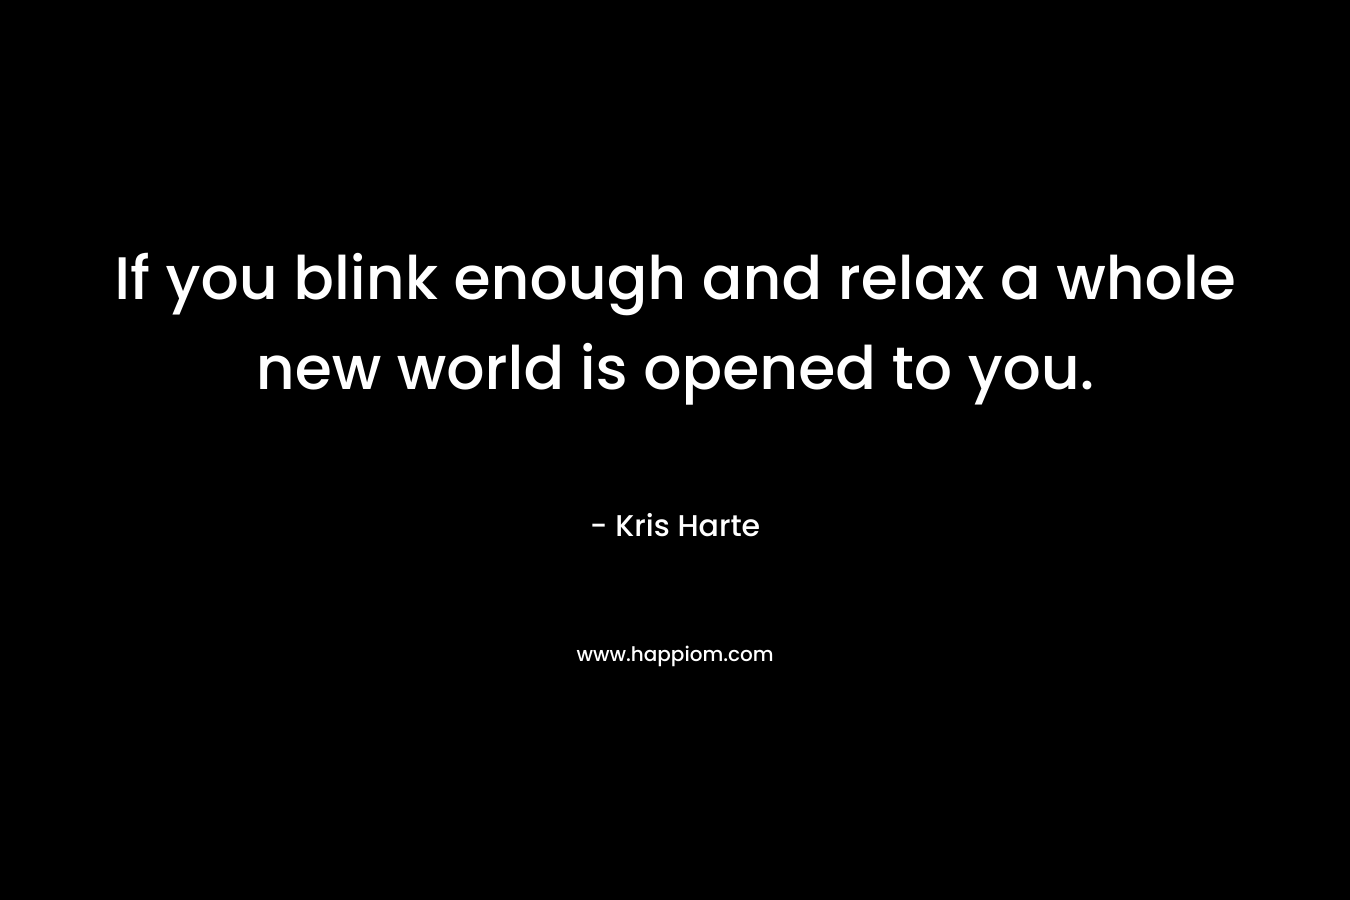 If you blink enough and relax a whole new world is opened to you.